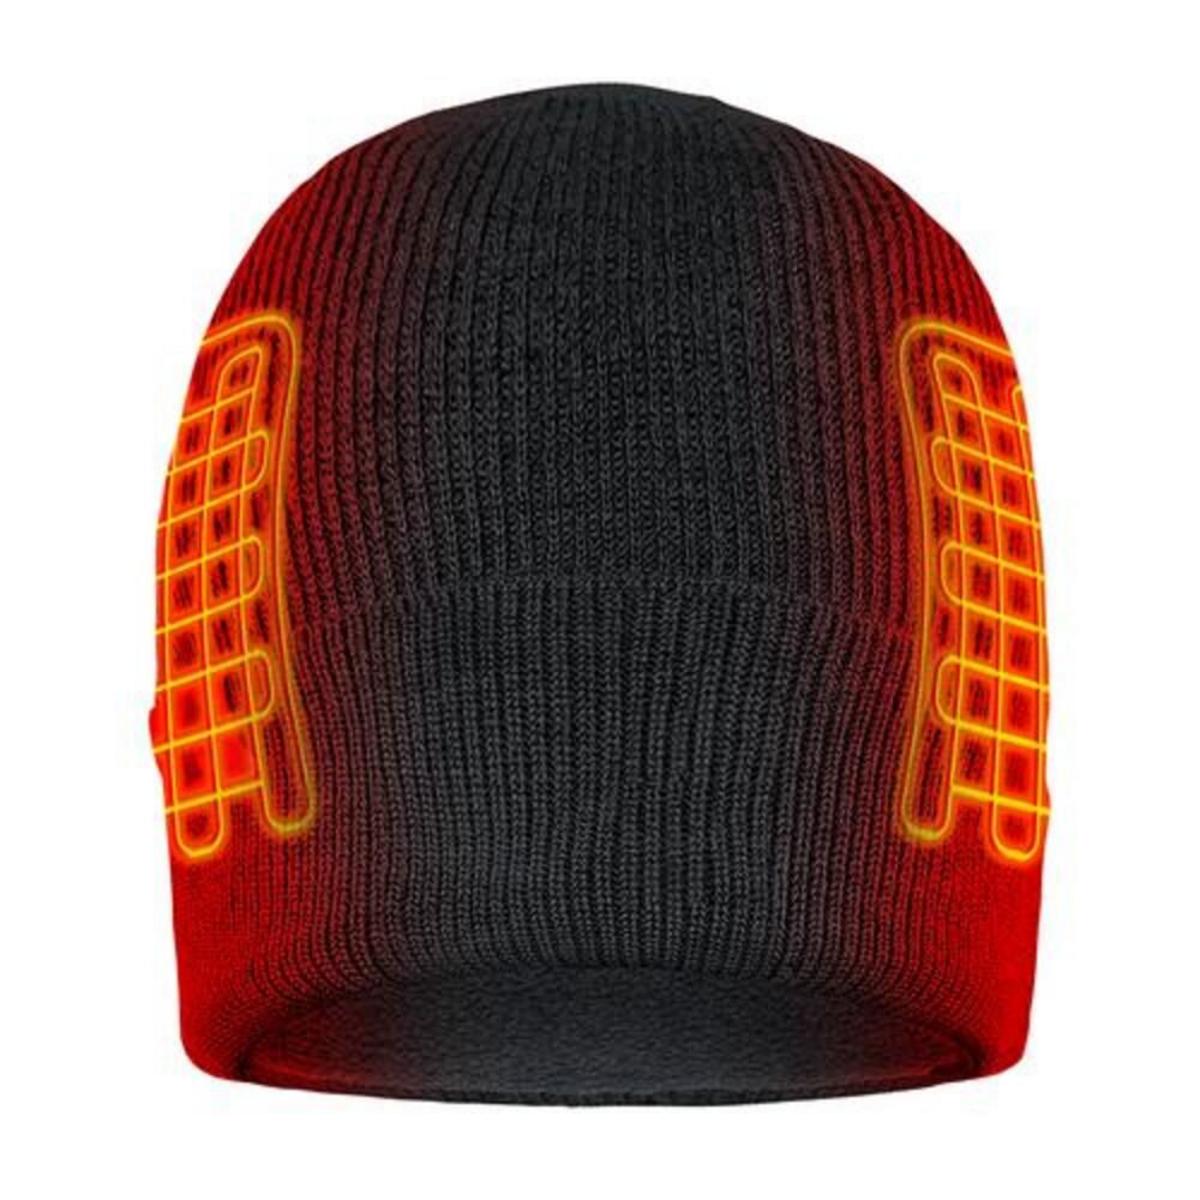 Open Box ActionHeat 5V Battery Heated Knit Hat - Front